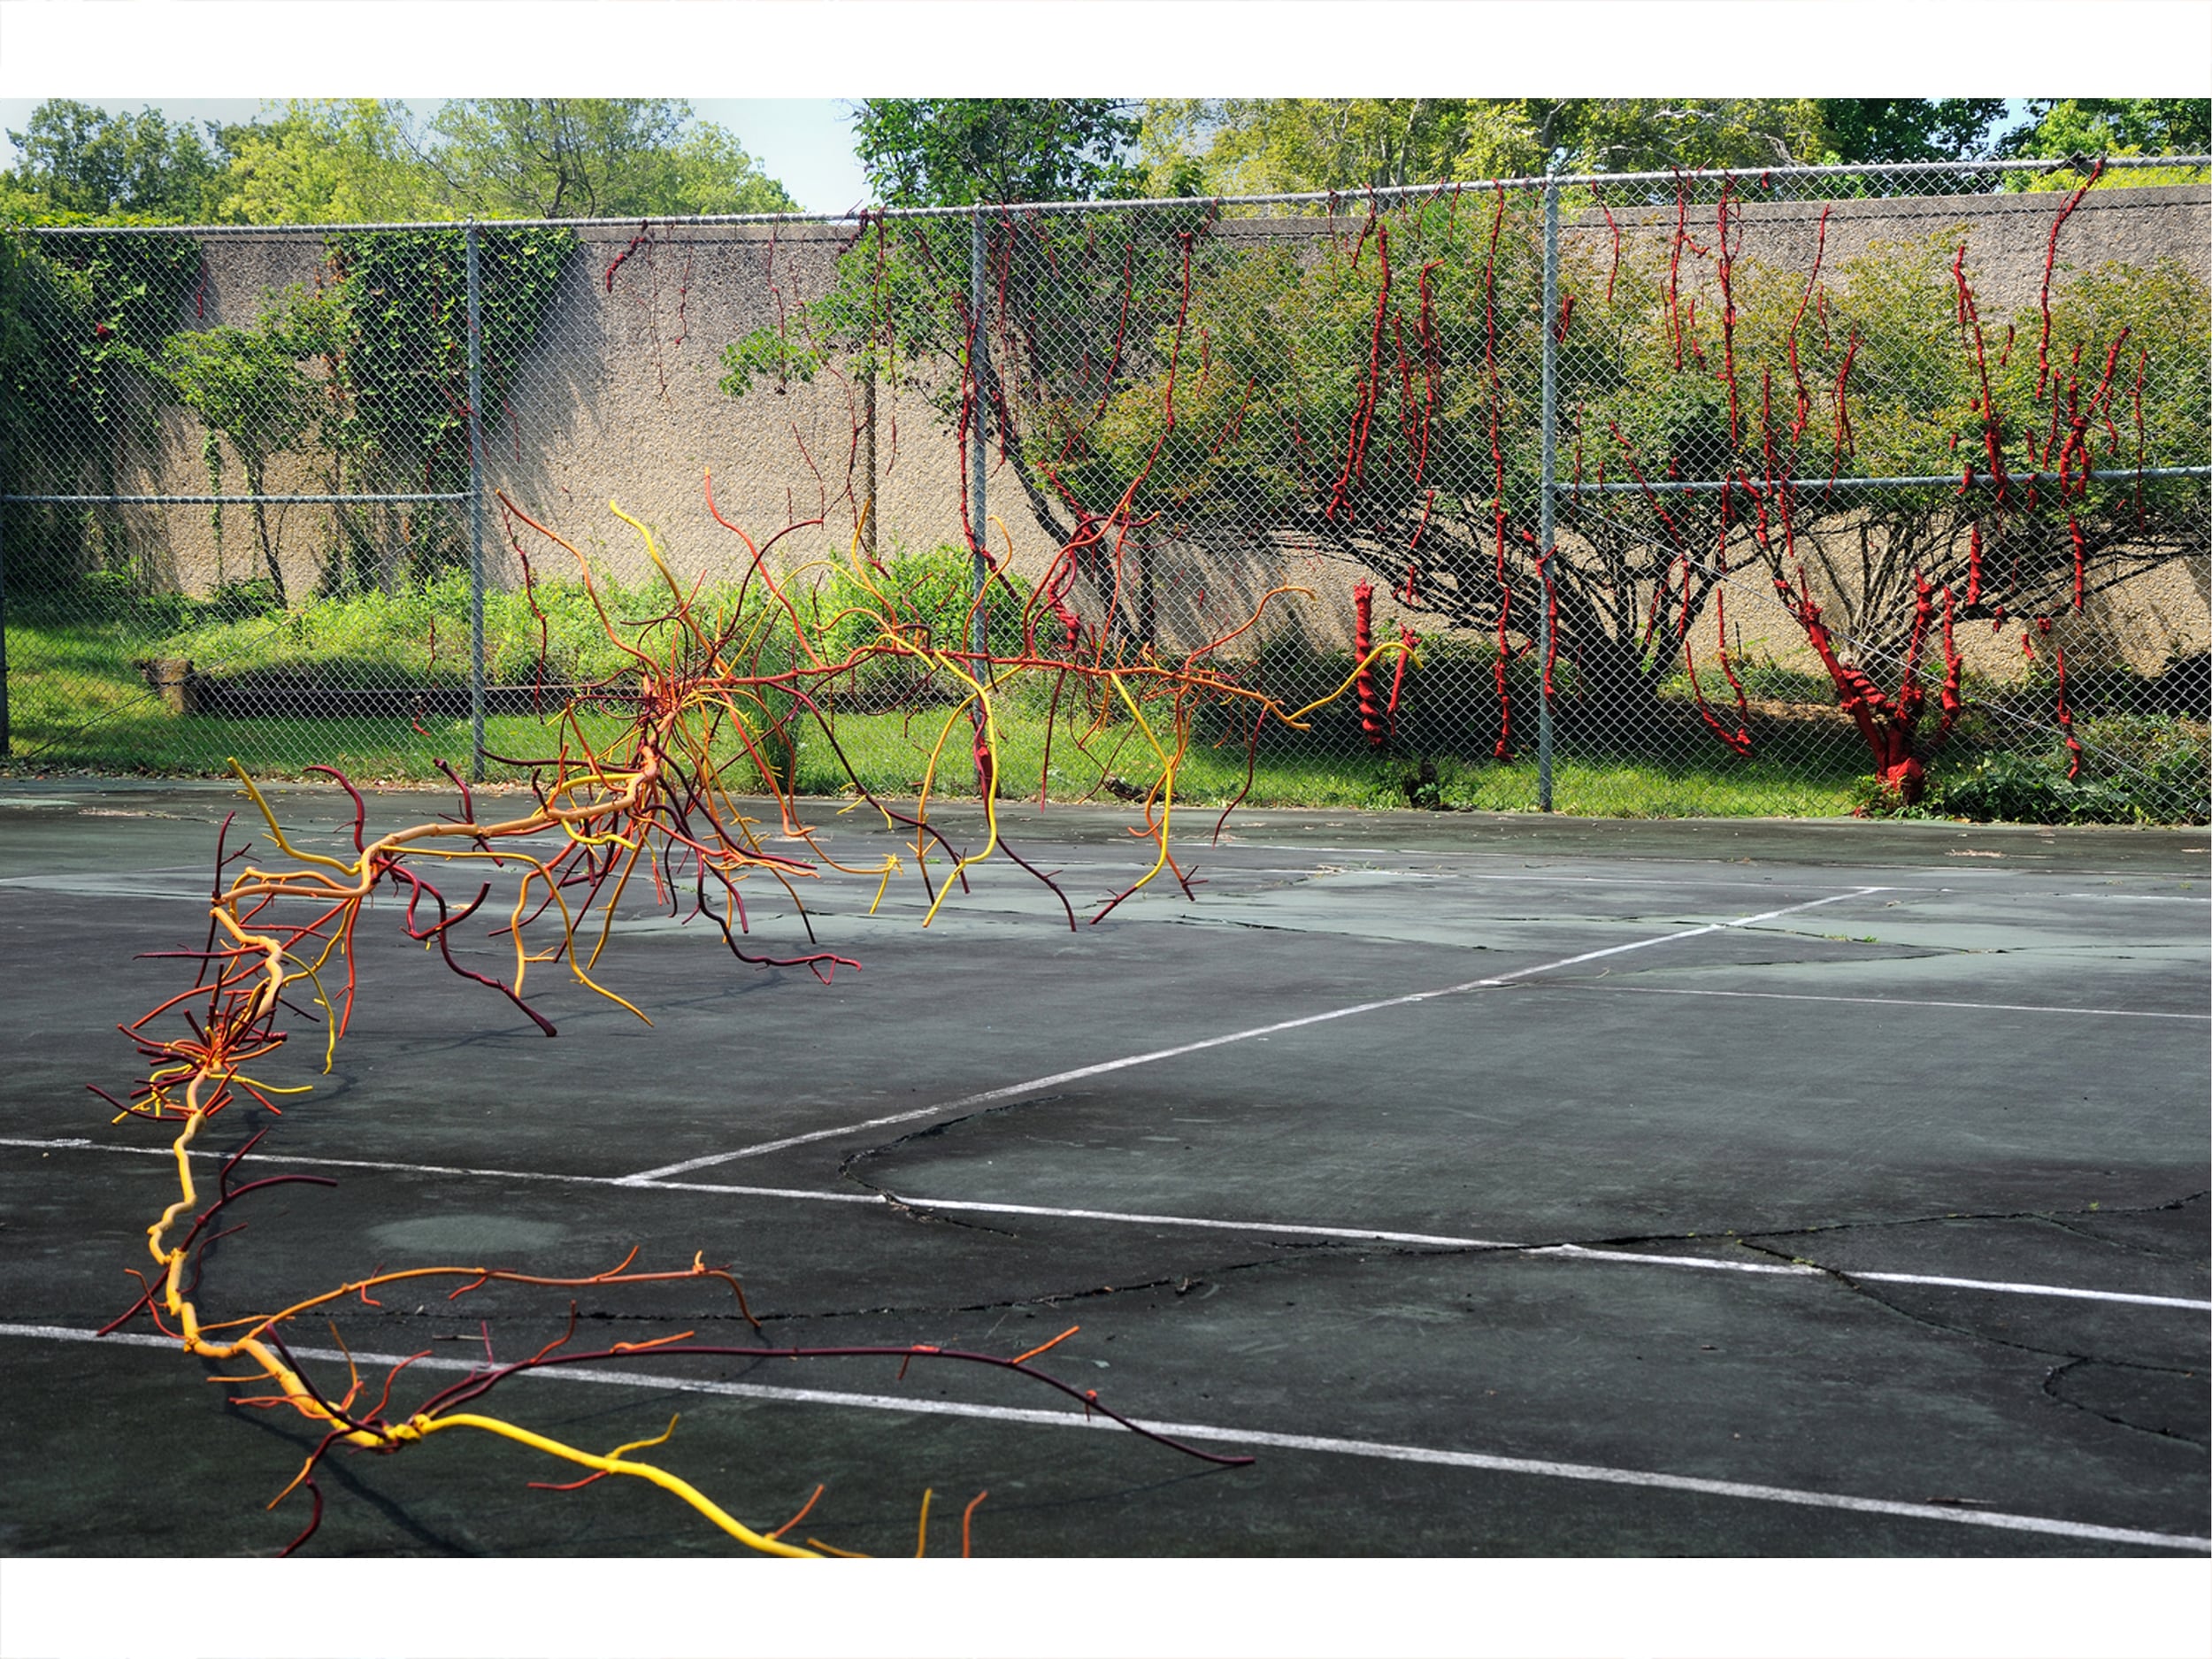 A colorful metal ROOT sculpture along the width of the tennis court